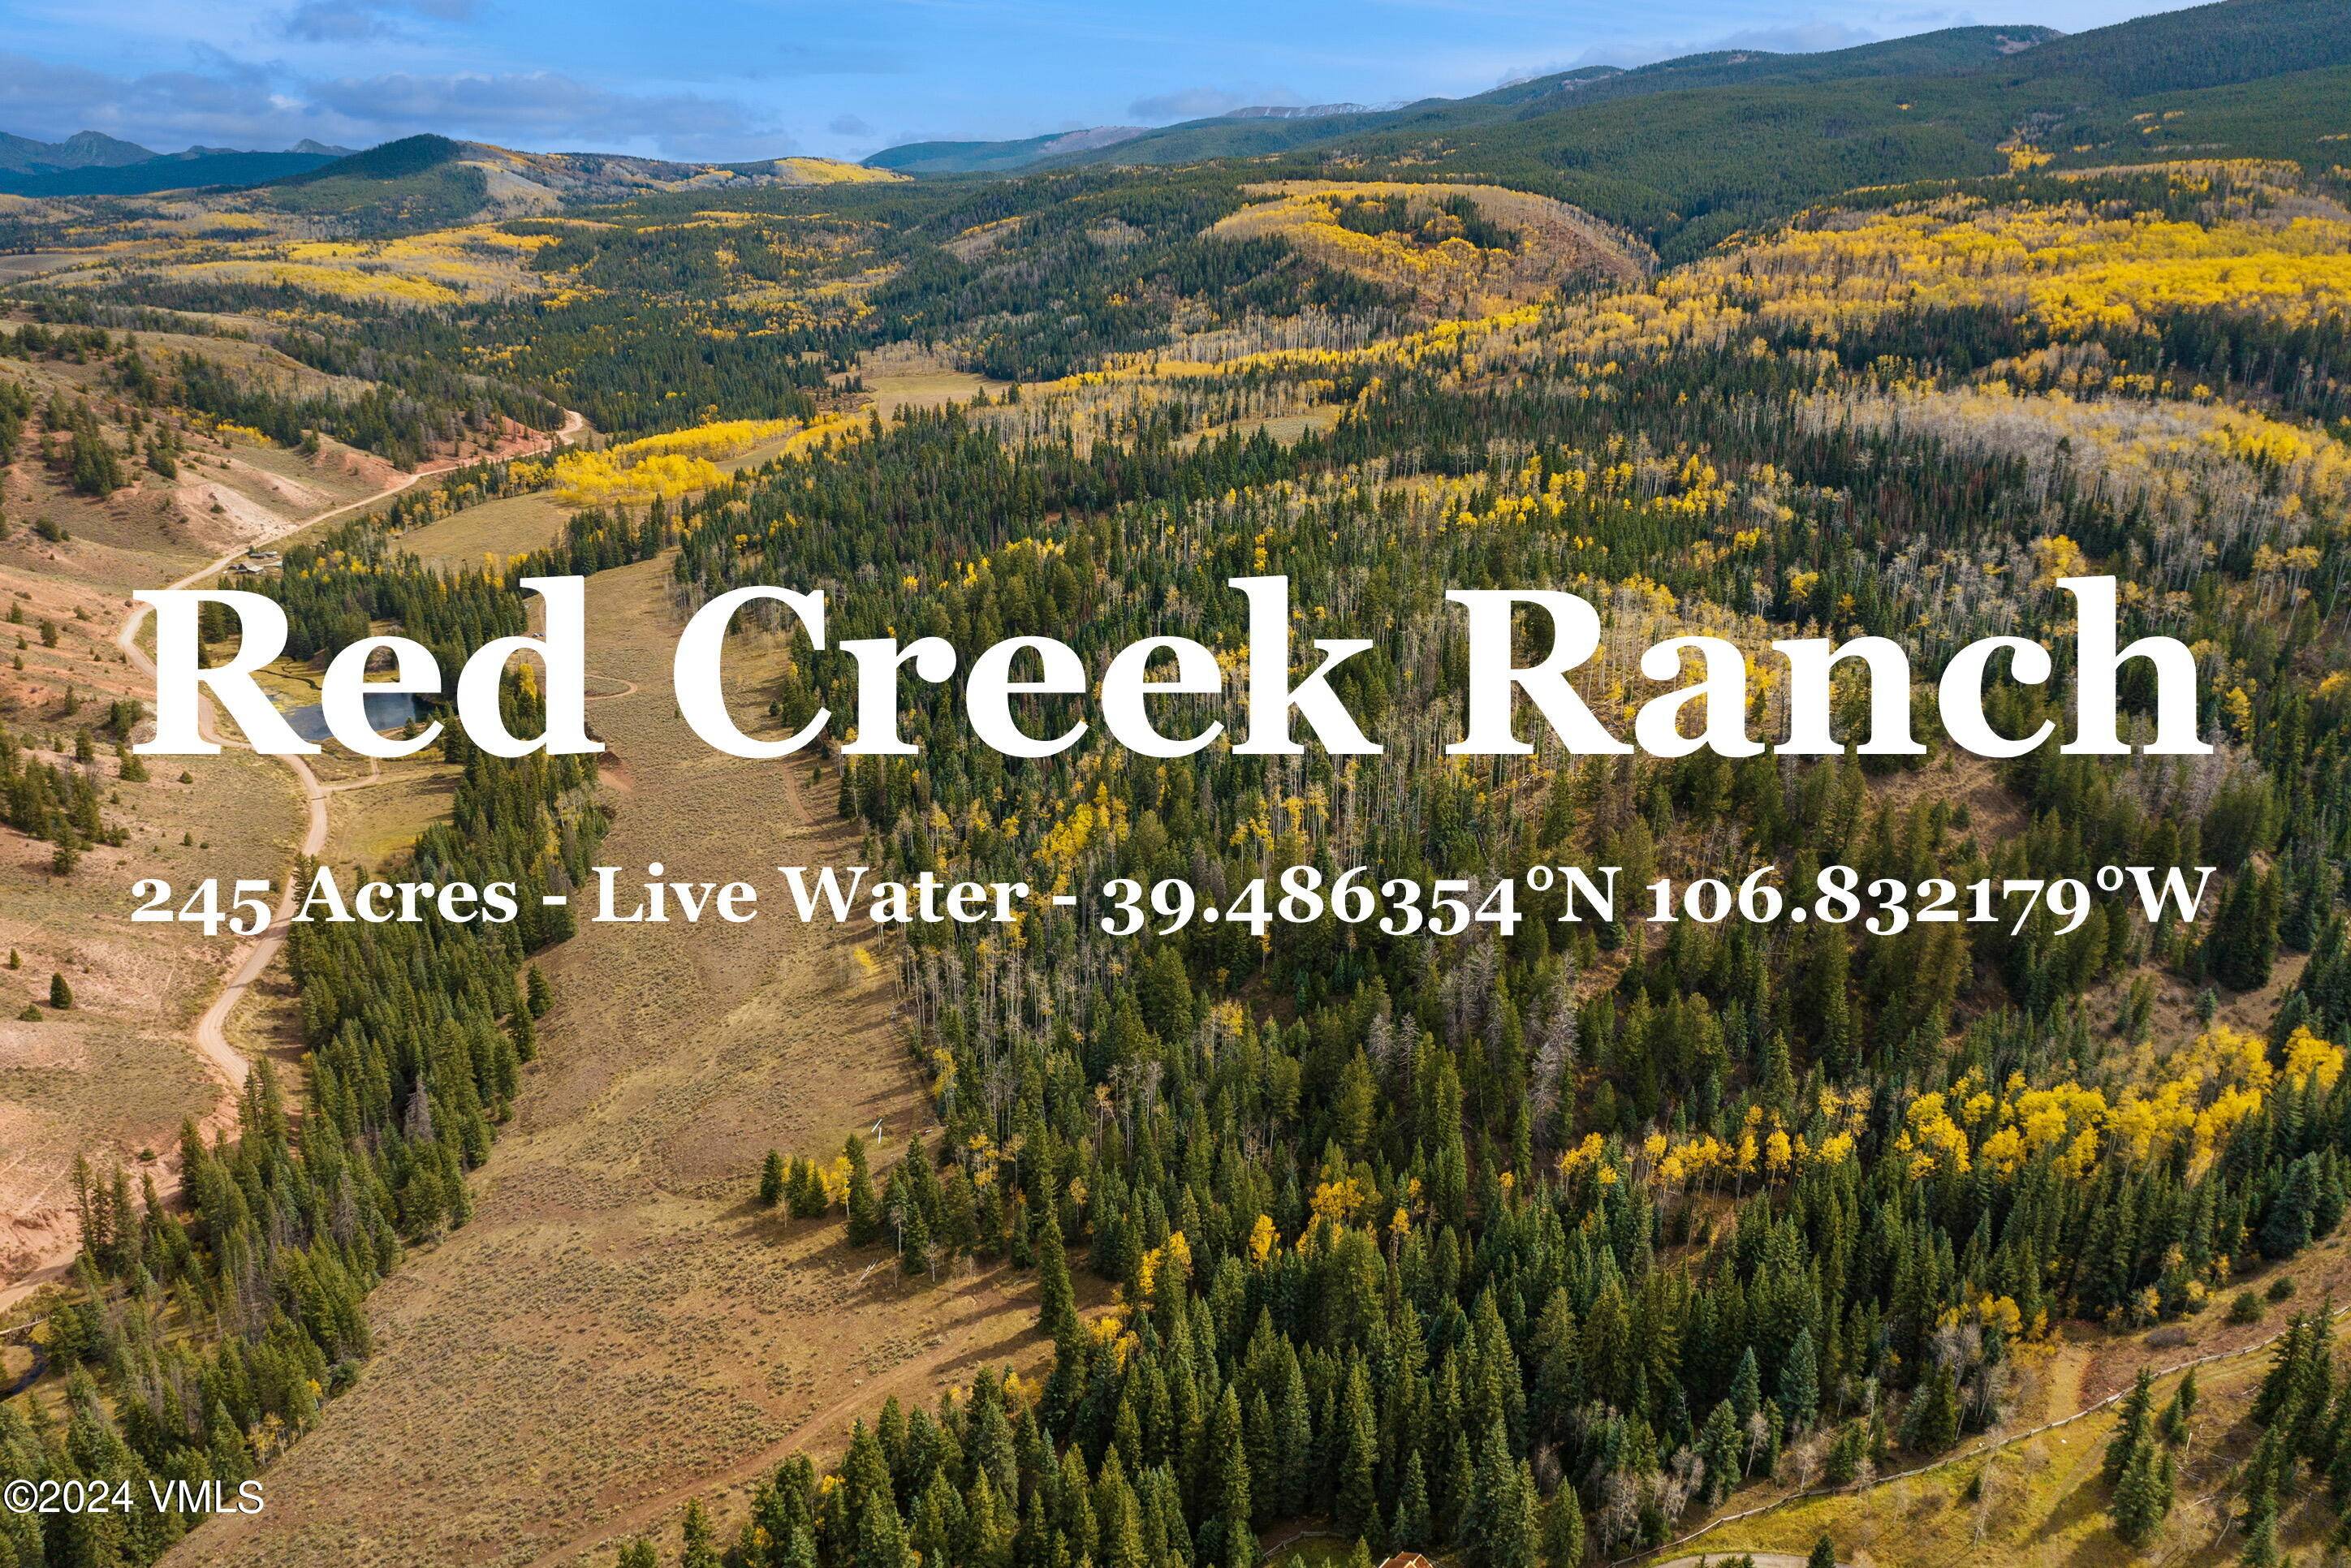 The Red Creek Ranch RCR is conveniently located between Colorado's Vail and Aspen ski resorts.